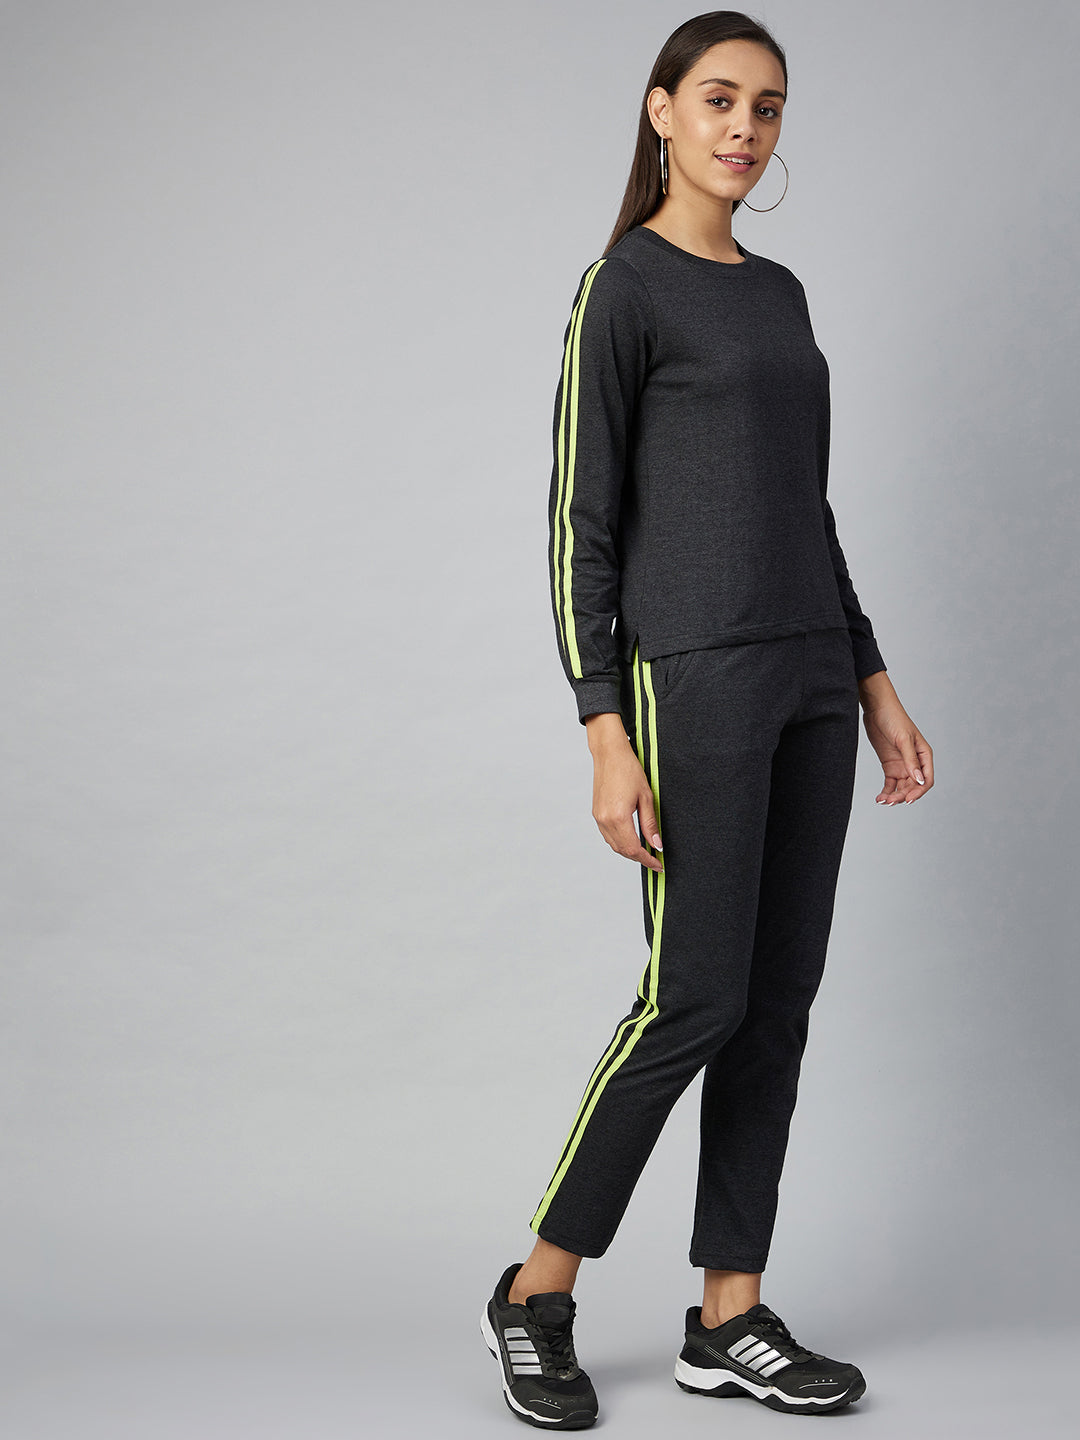 Women's Cotton Dark Grey Track Suit Set with Lime Green Stripe